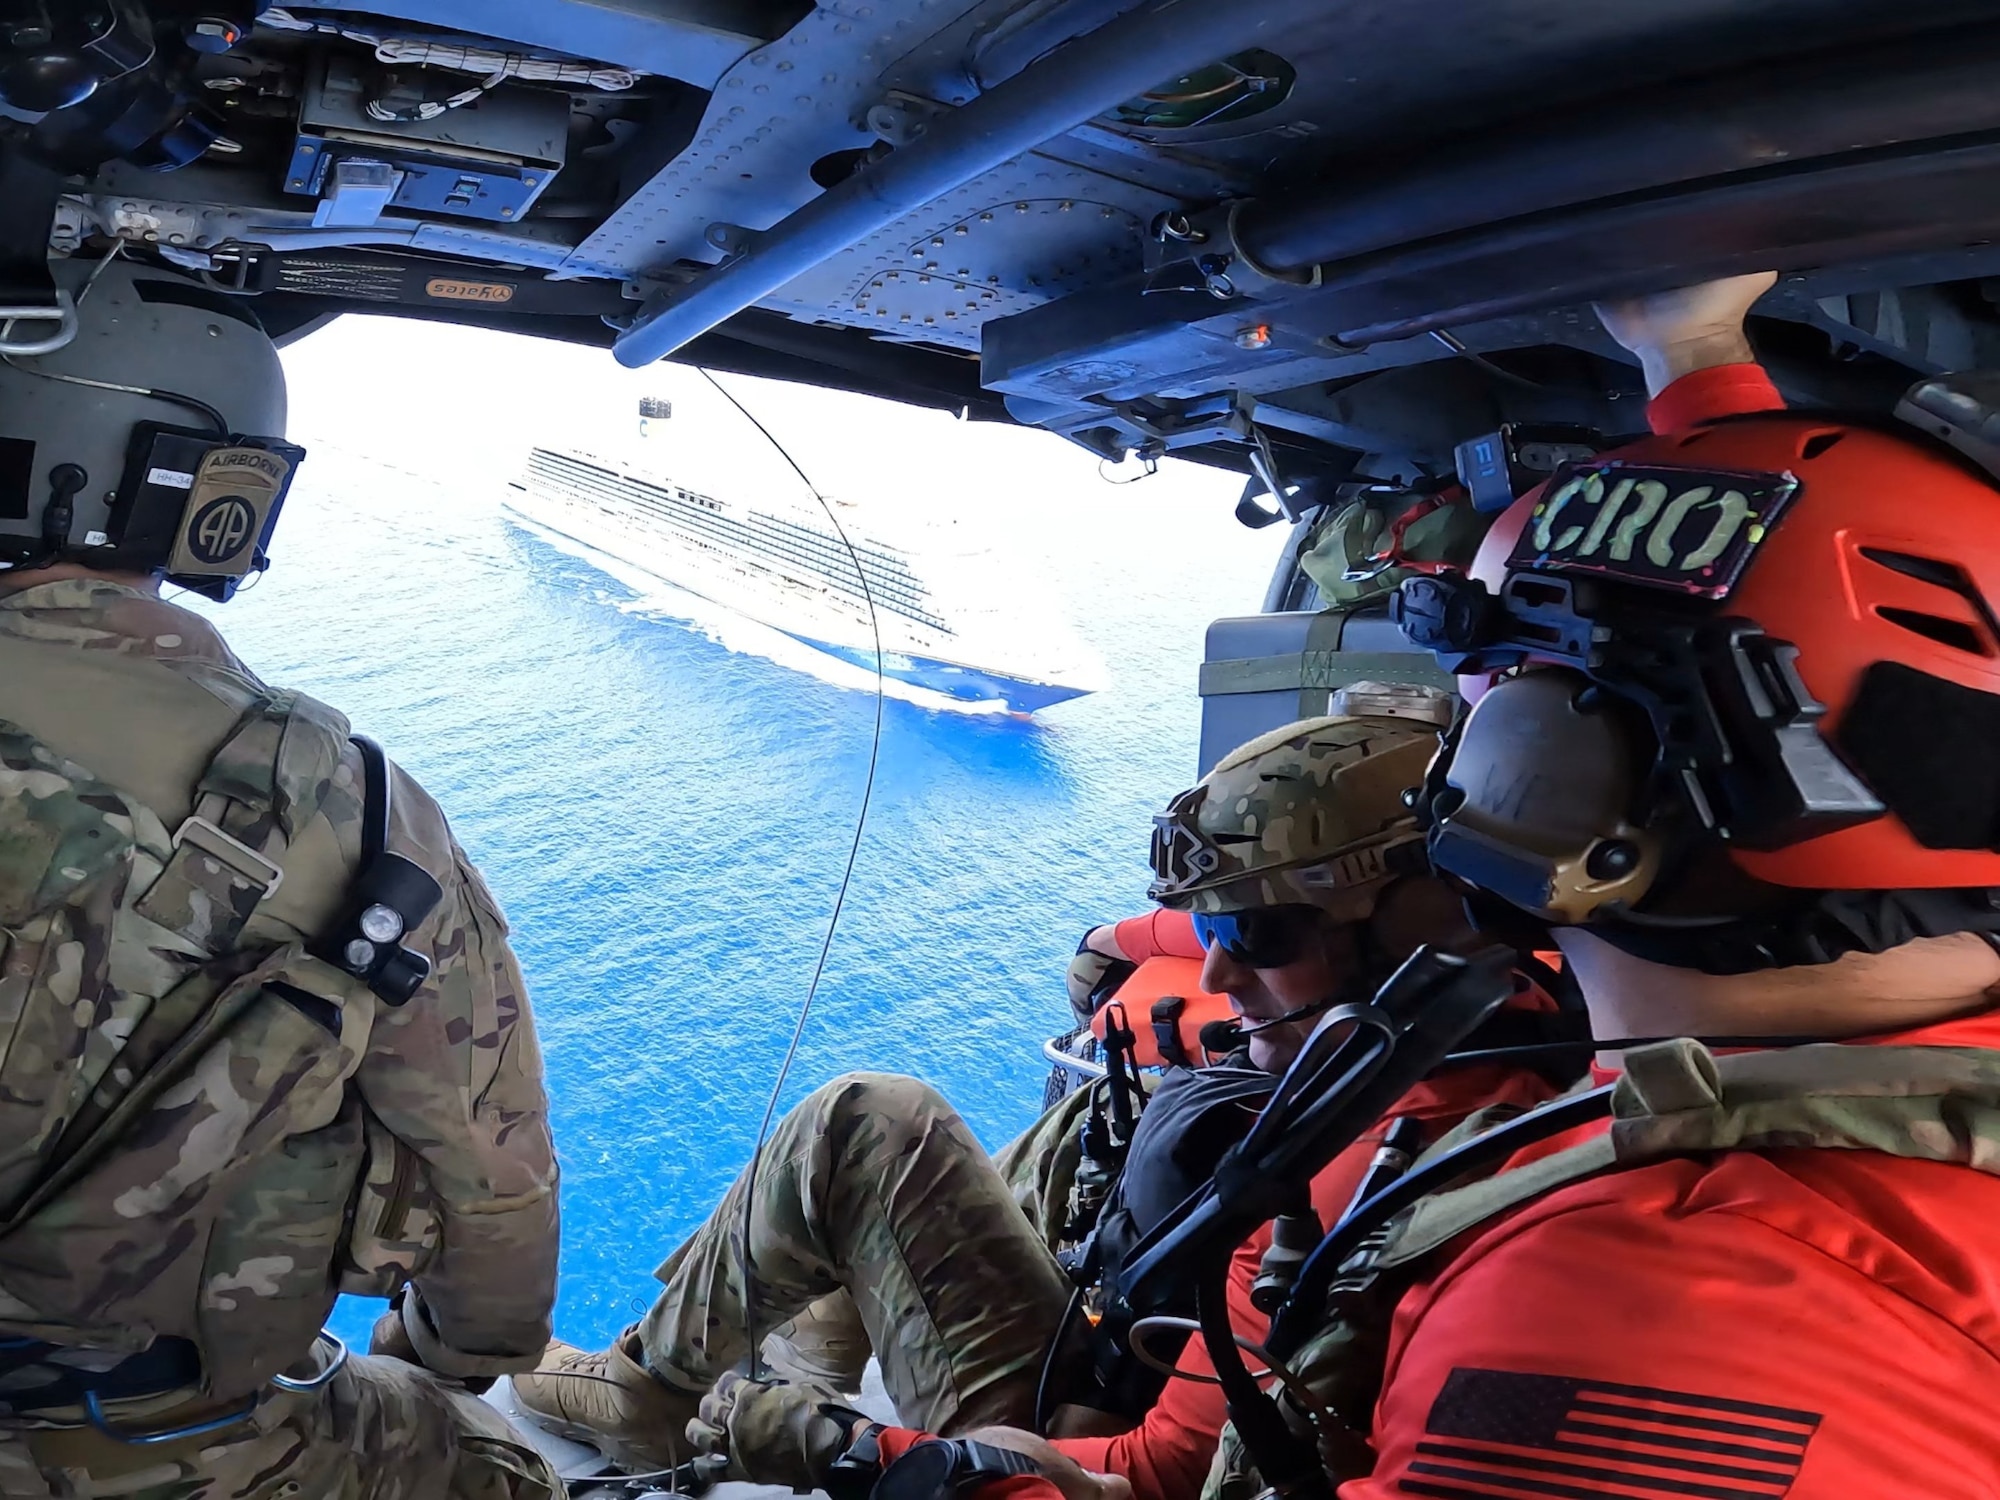 920th RQW successfully conducts civilian medical airlift 350 miles off coast of United States